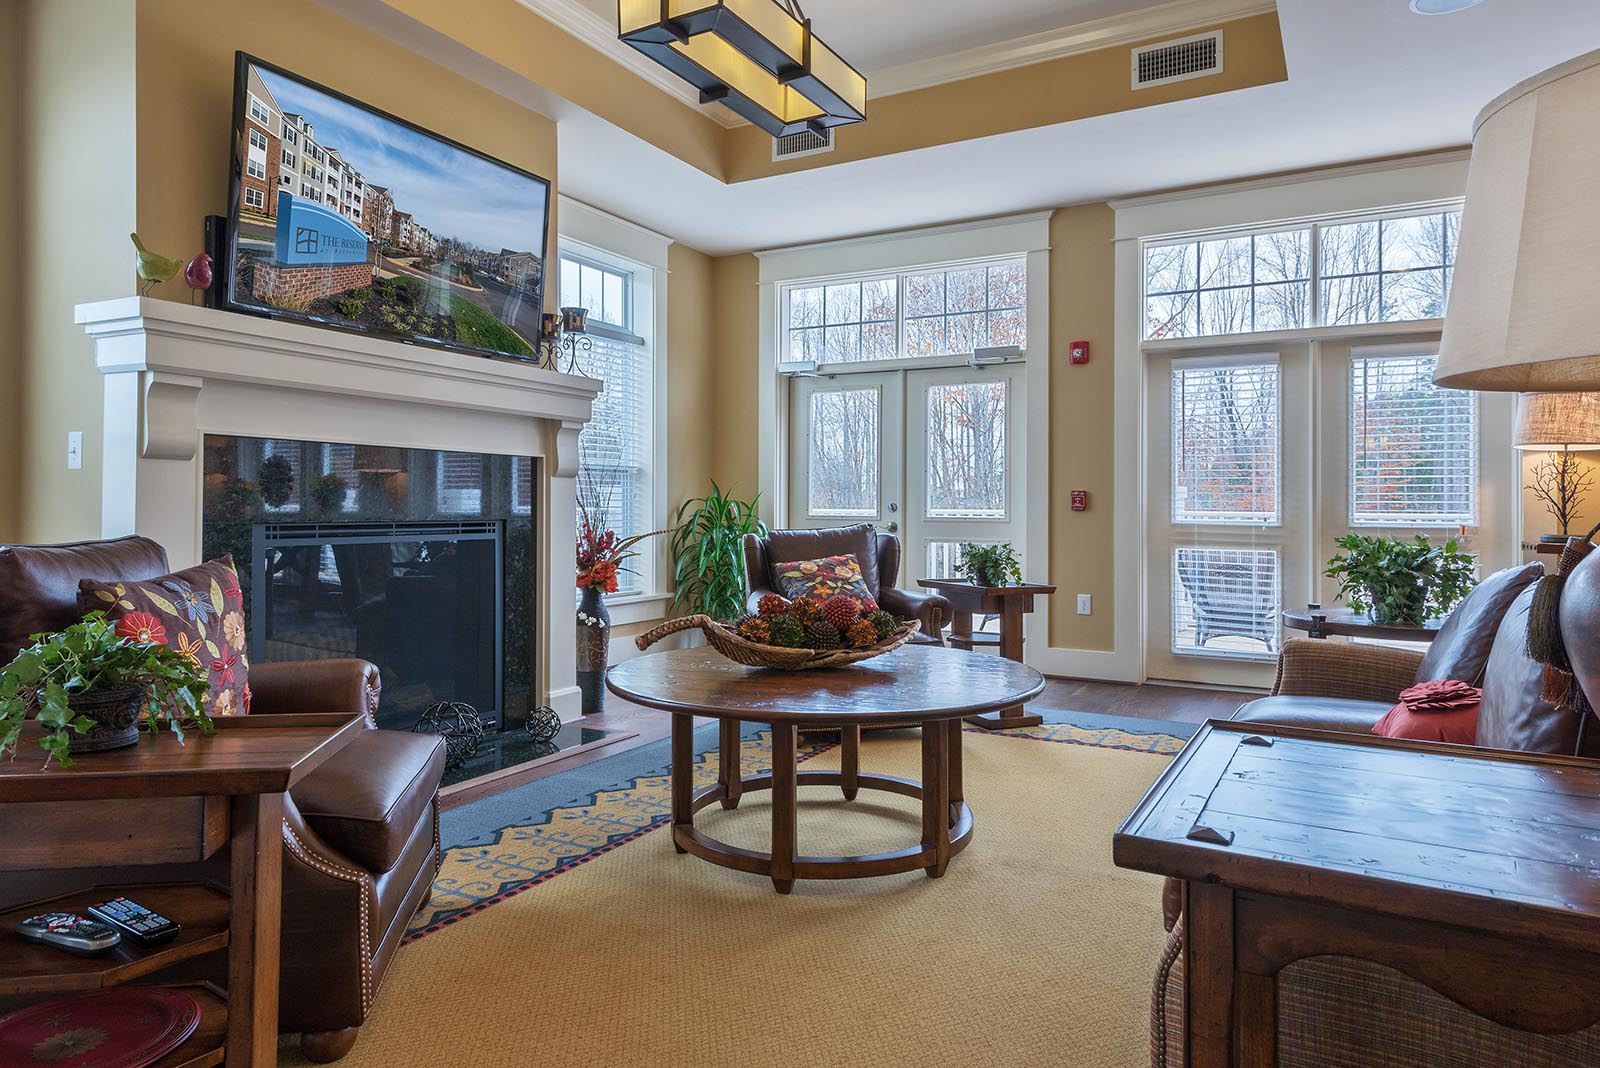 The Reserve at Belvedere: Luxury Apartments in Charlottesville